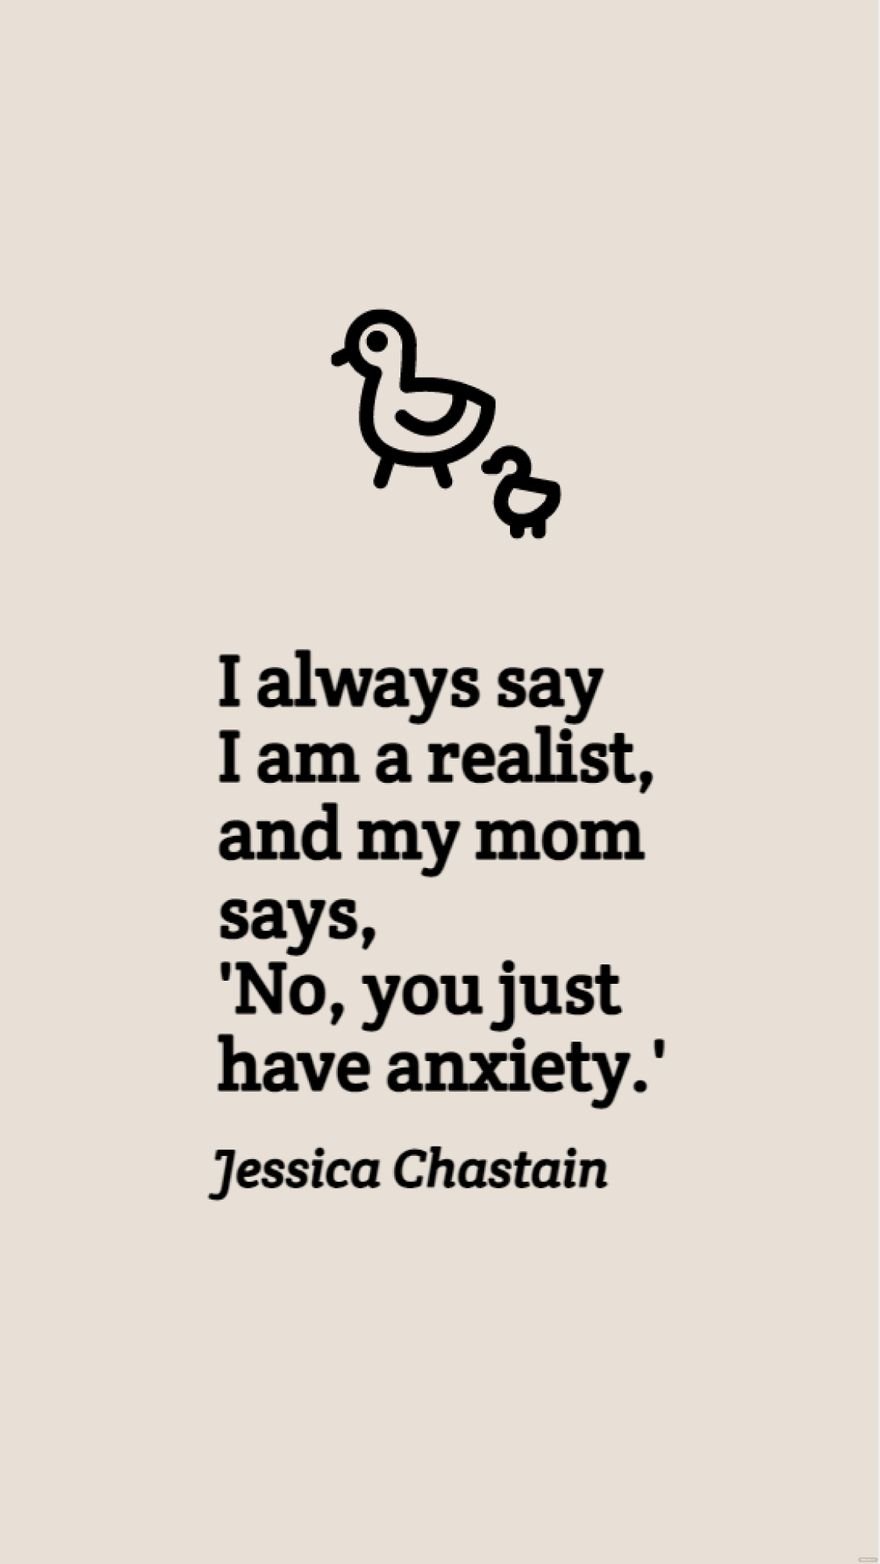 Jessica Chastain - I always say I am a realist, and my mom says, 'No, you just have anxiety.'